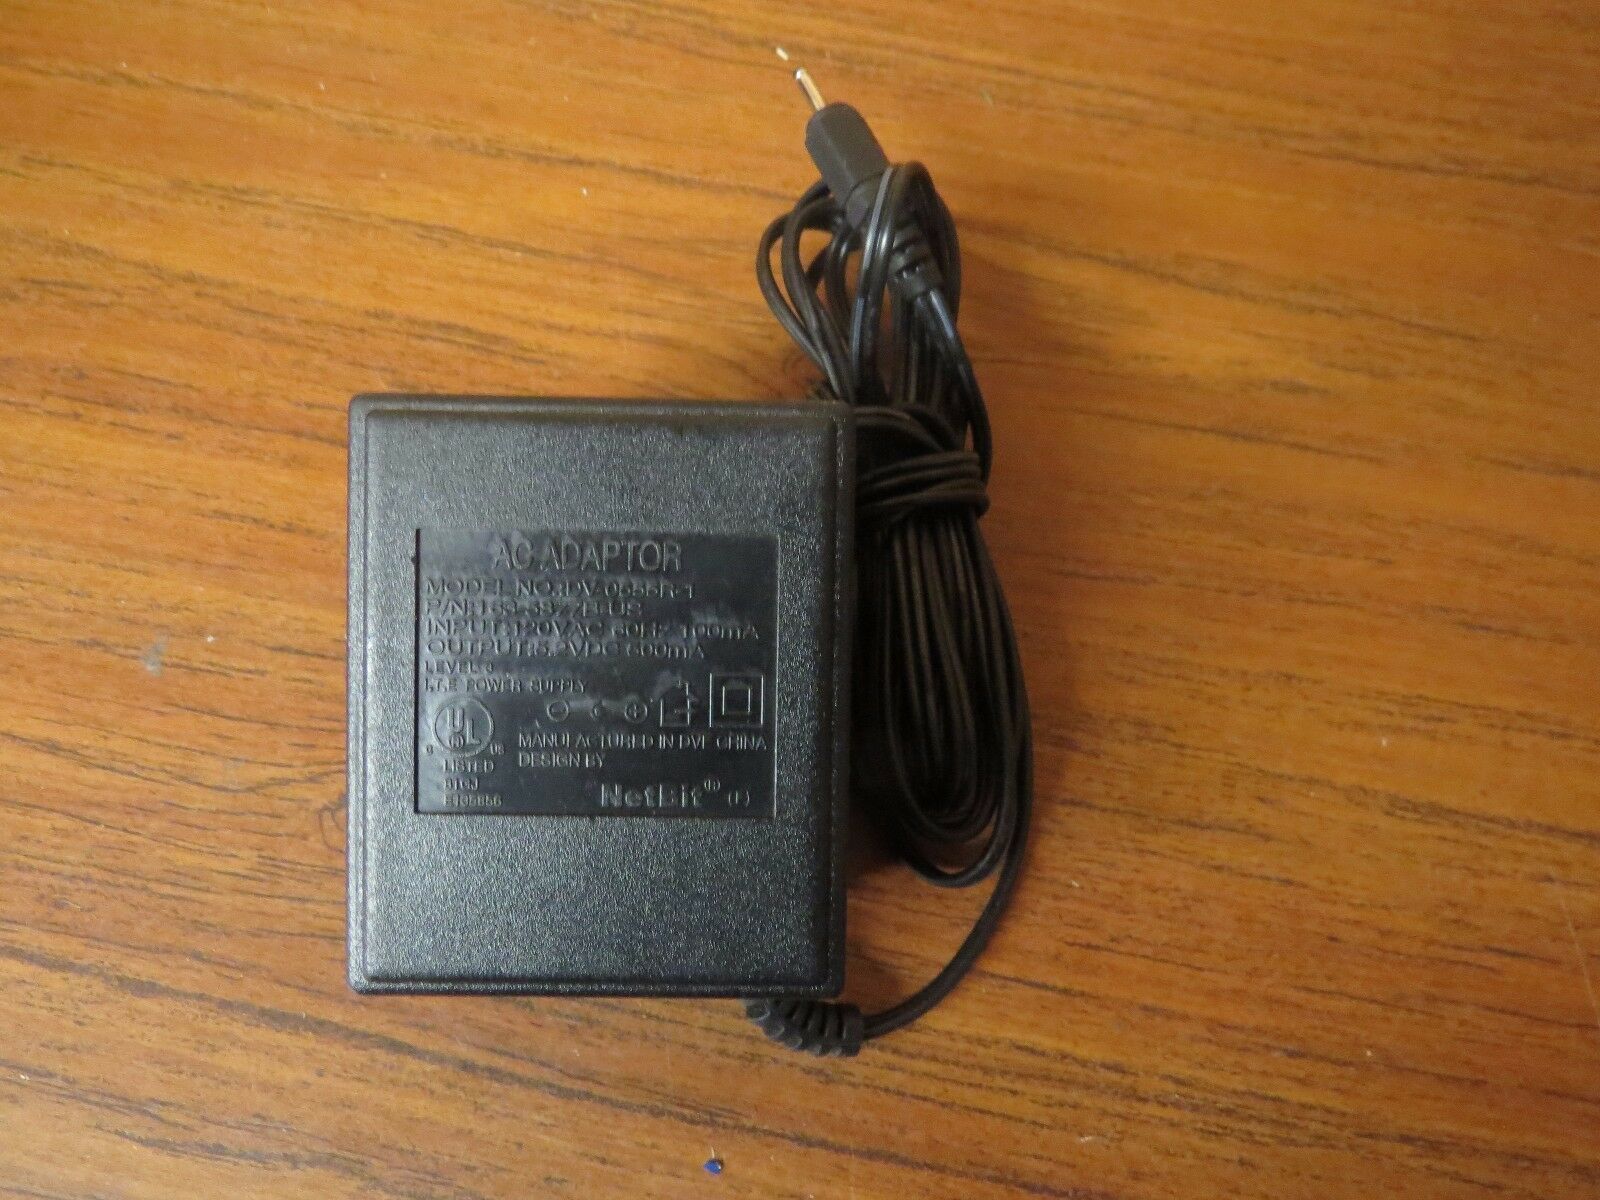 NetBit Ac Adapter Model DV-0555R-1 Brand: Unbranded/Generic Model: DV-0555R-1 MPN: Does Not Apply Output Voltage: - Click Image to Close